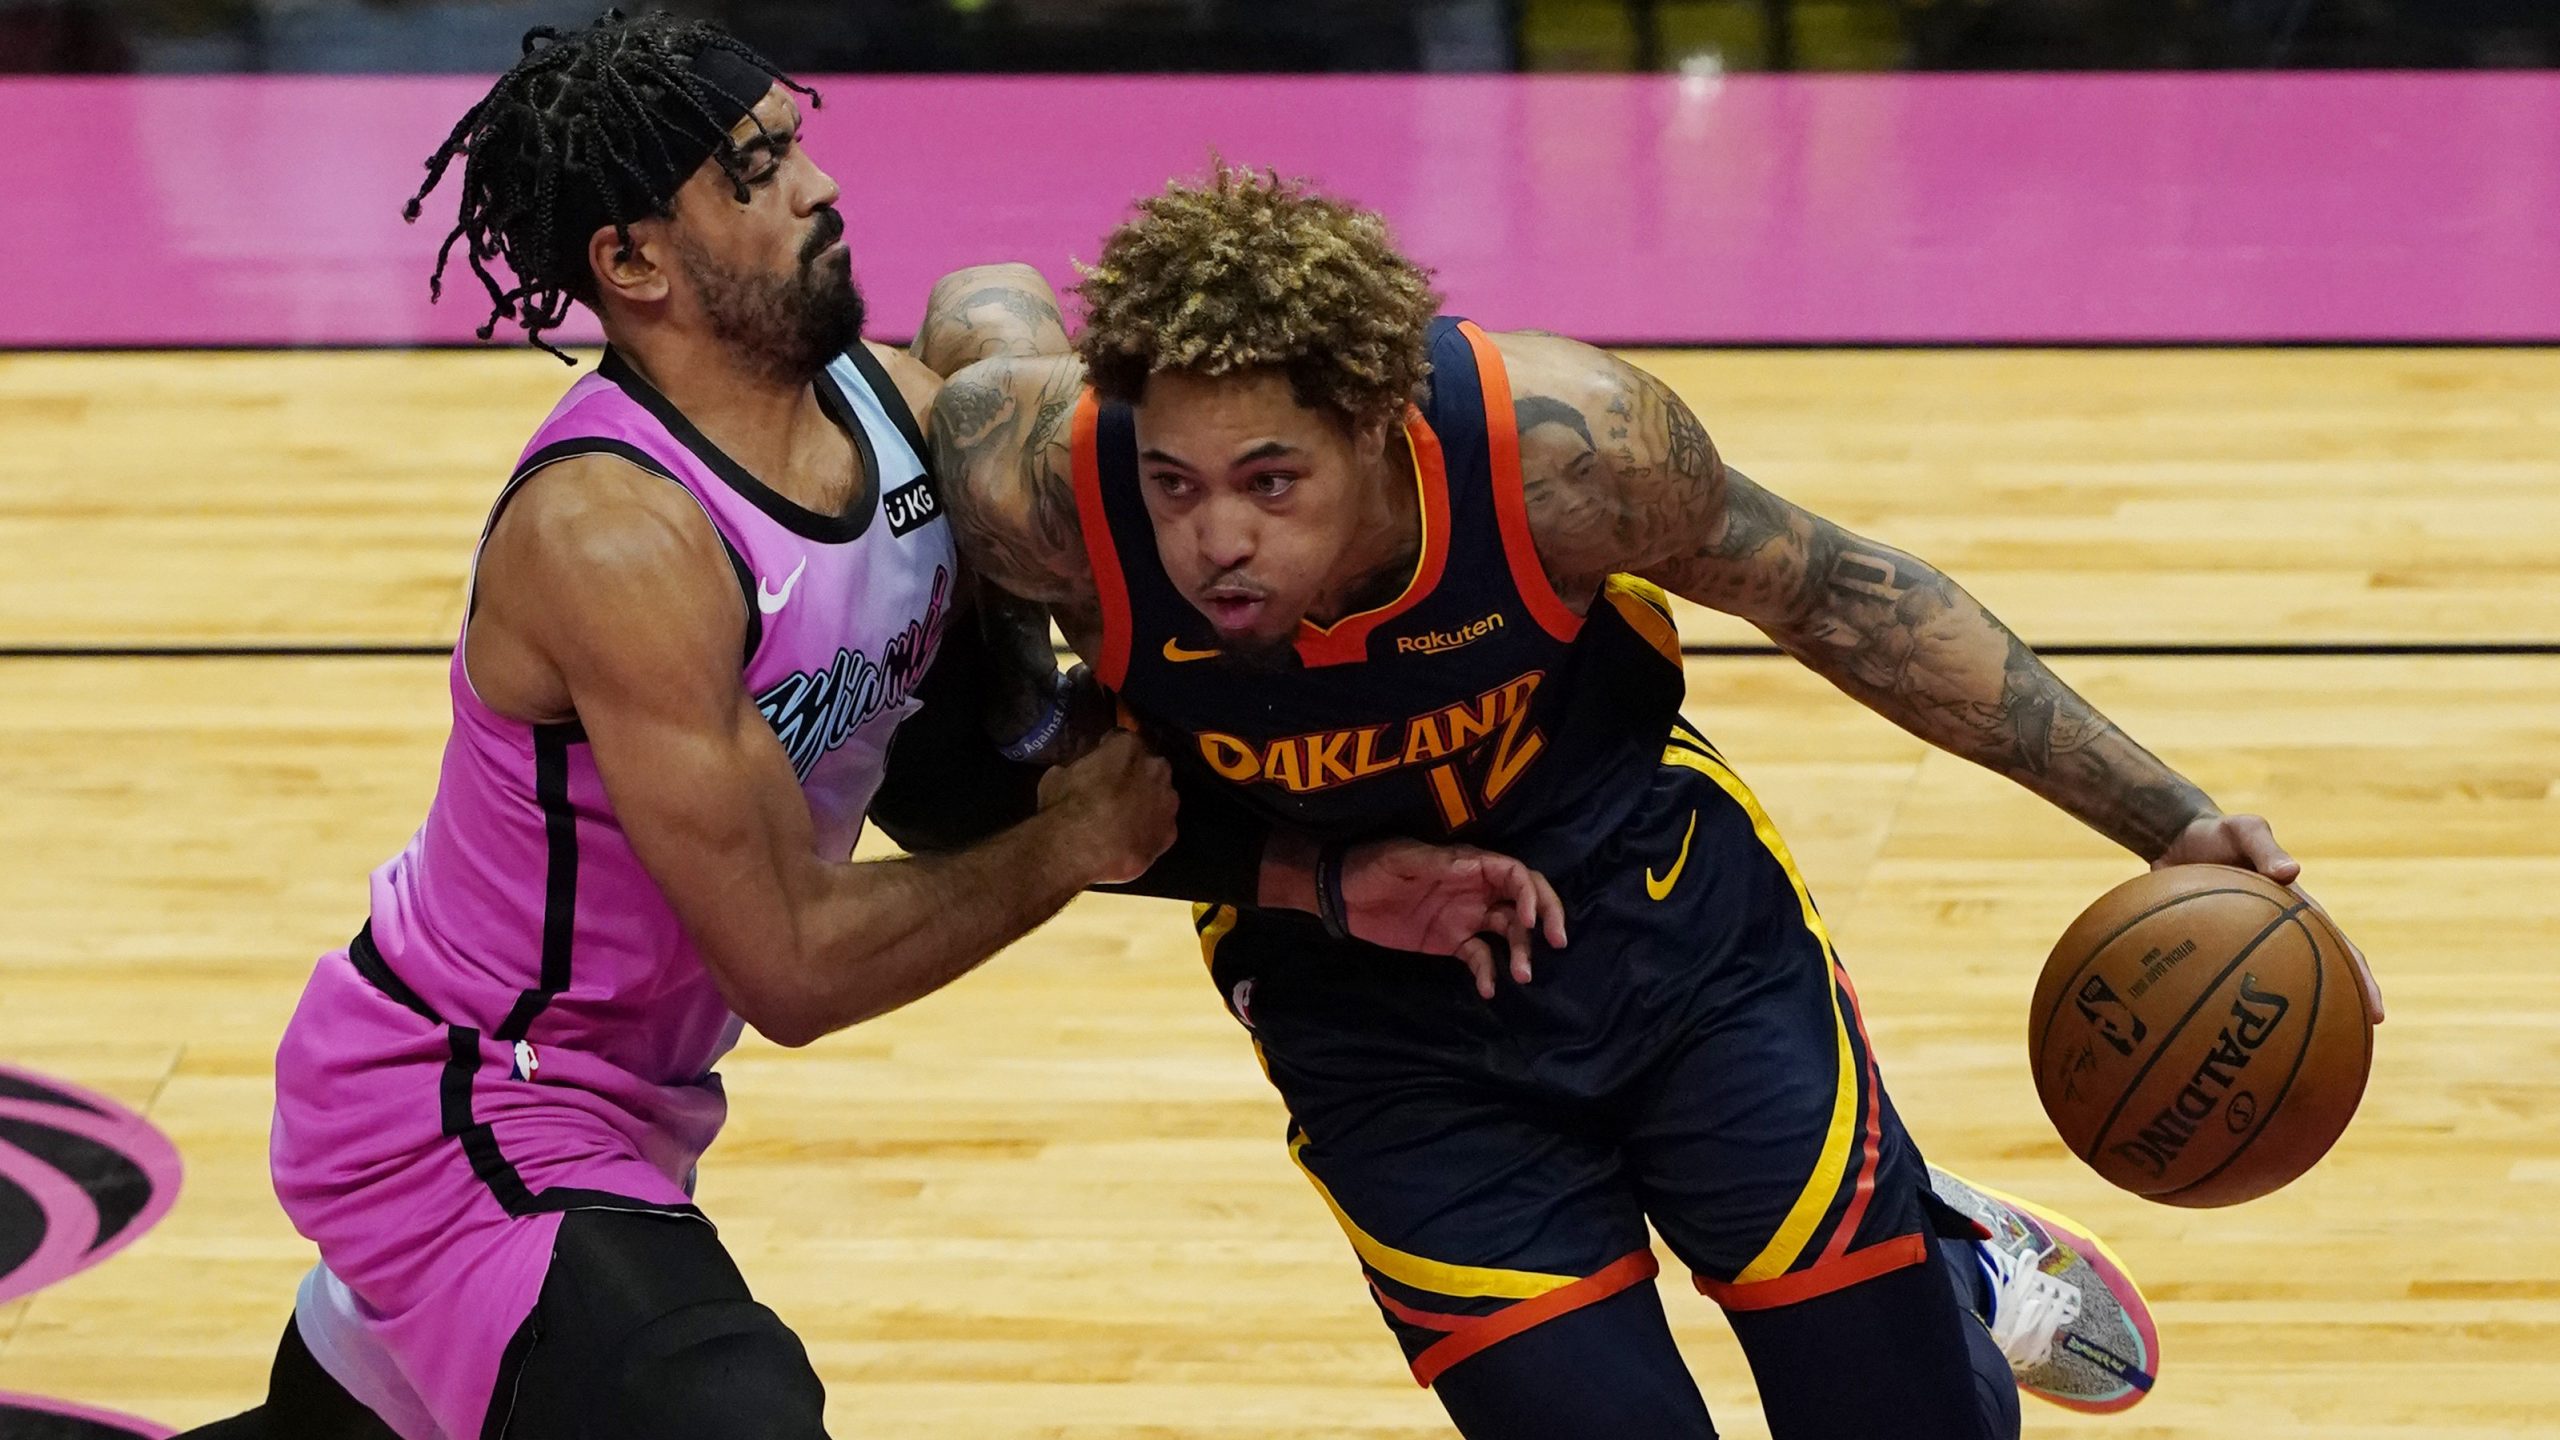 Lakers, Nets, Clippers, Blazers, others made offer to Kelly Oubre Jr.